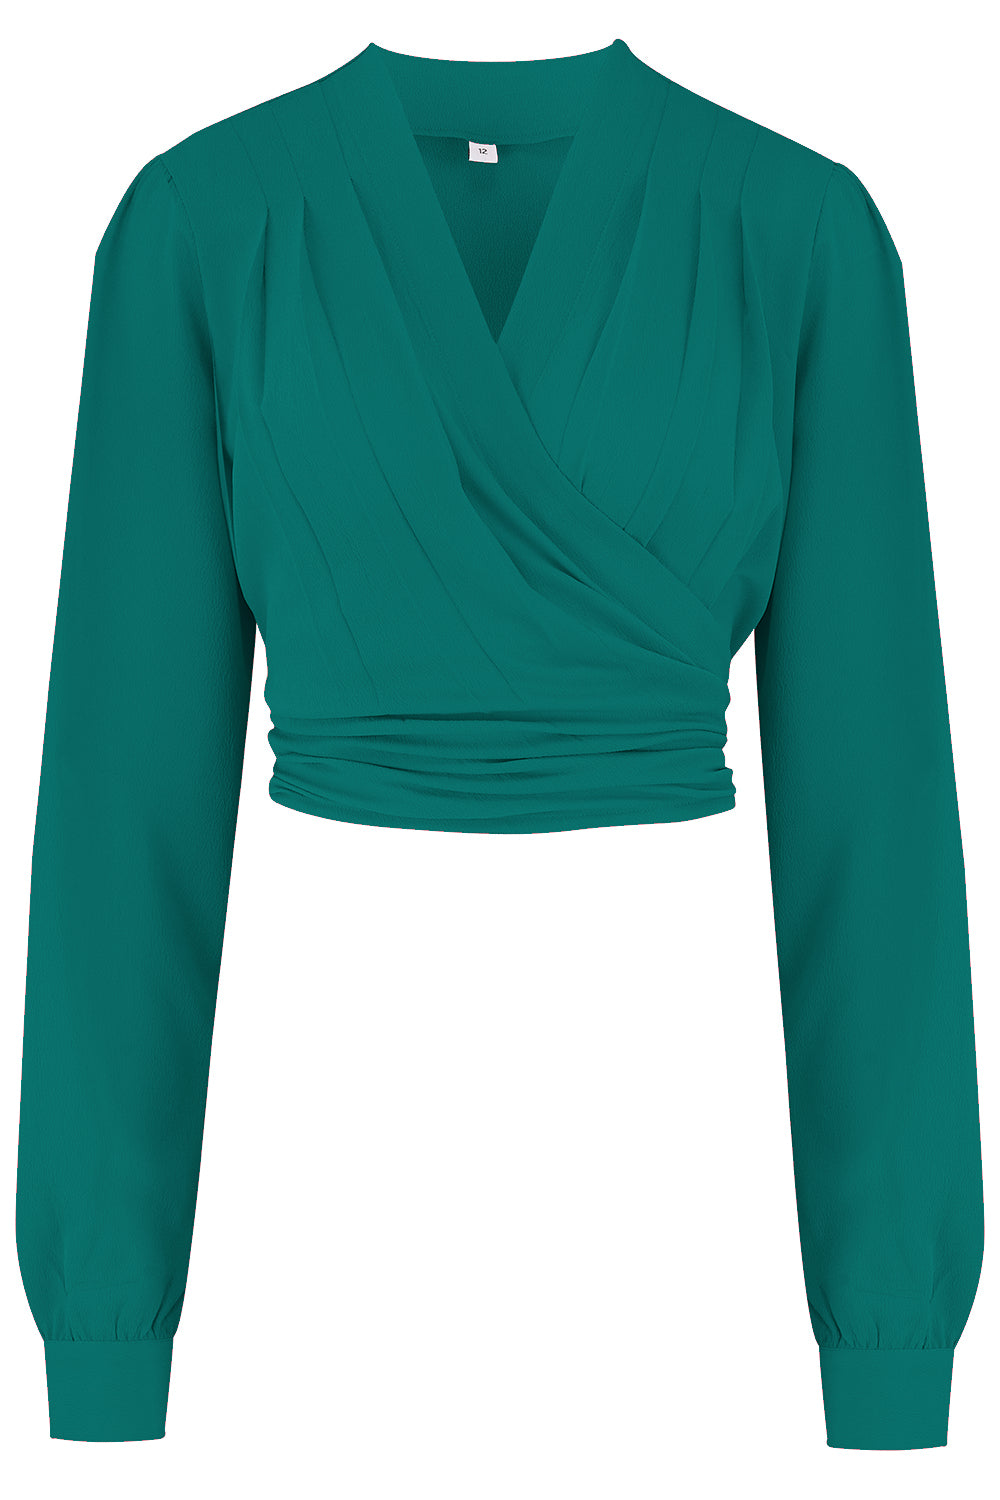 The "Darla" Long Sleeve Wrap Blouse in Teal, True Vintage Style